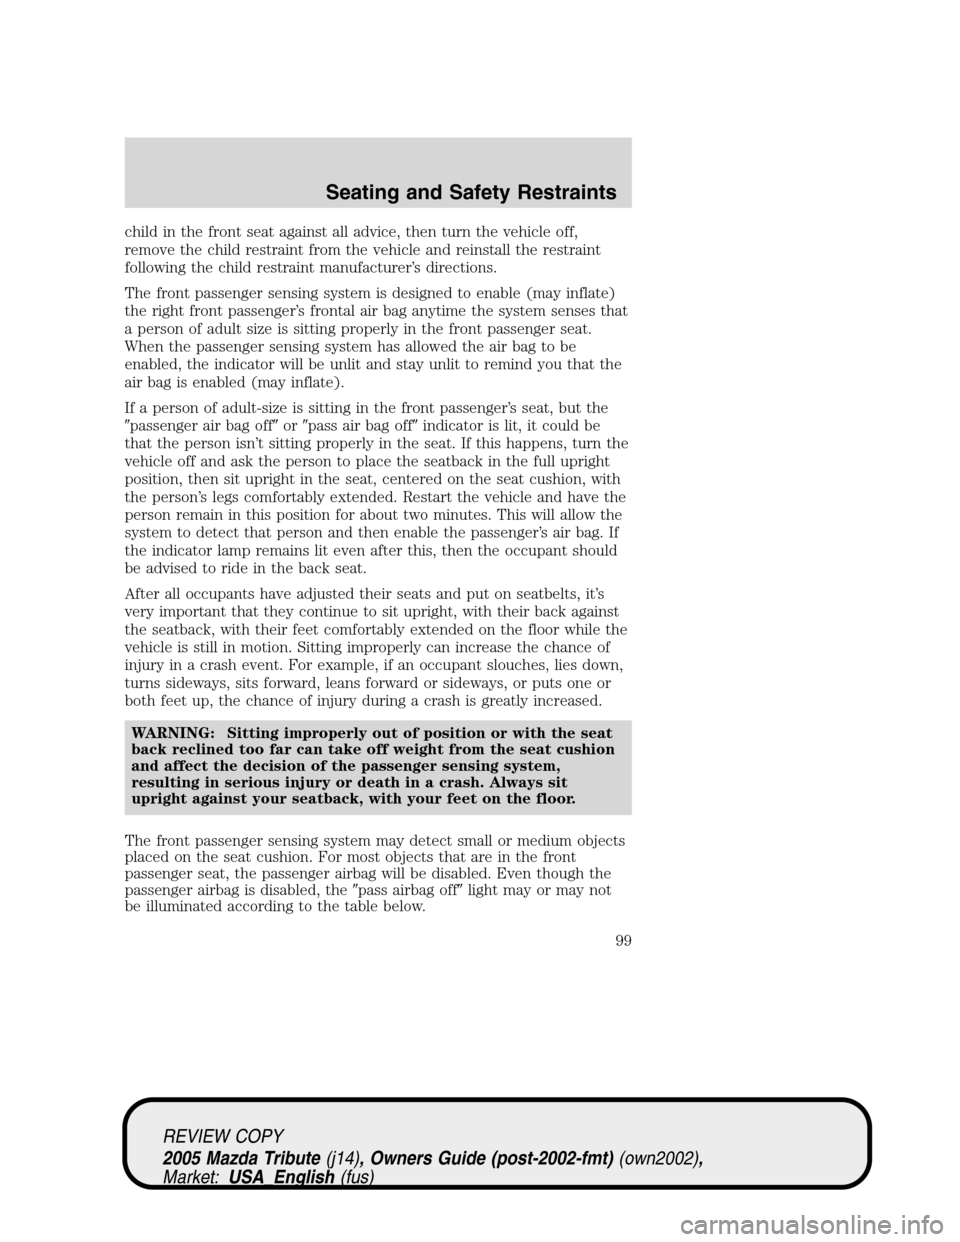 MAZDA MODEL TRIBUTE 2005  Owners Manual (in English) child in the front seat against all advice, then turn the vehicle off,
remove the child restraint from the vehicle and reinstall the restraint
following the child restraint manufacturer’s directions